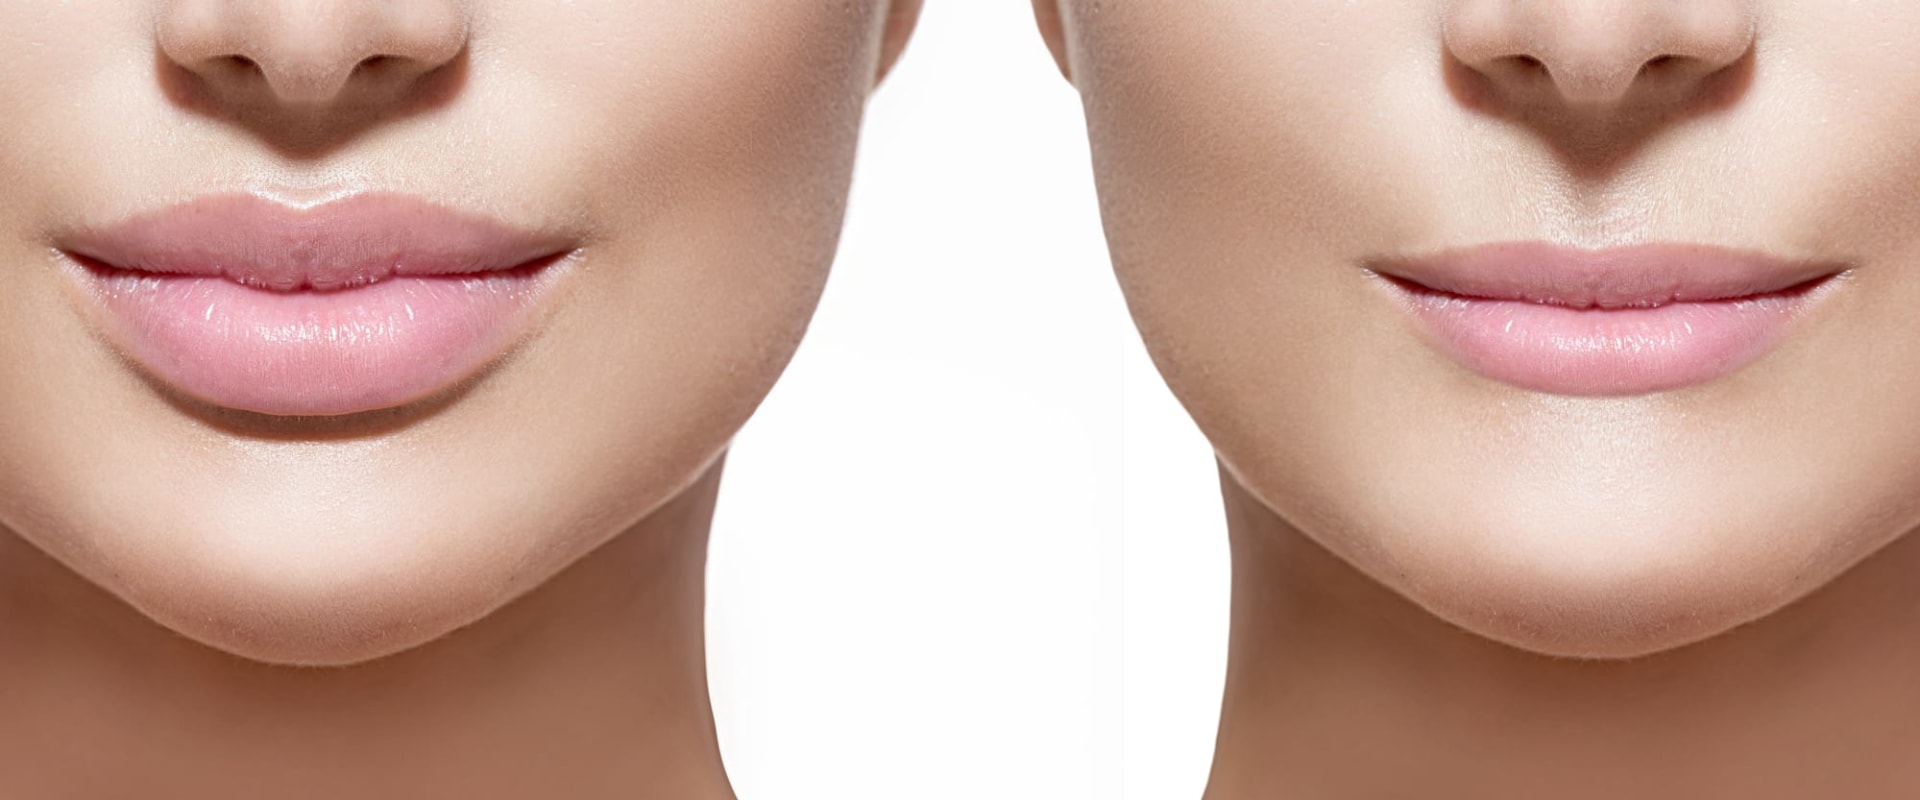 When Will Juvederm Lumps Disappear?